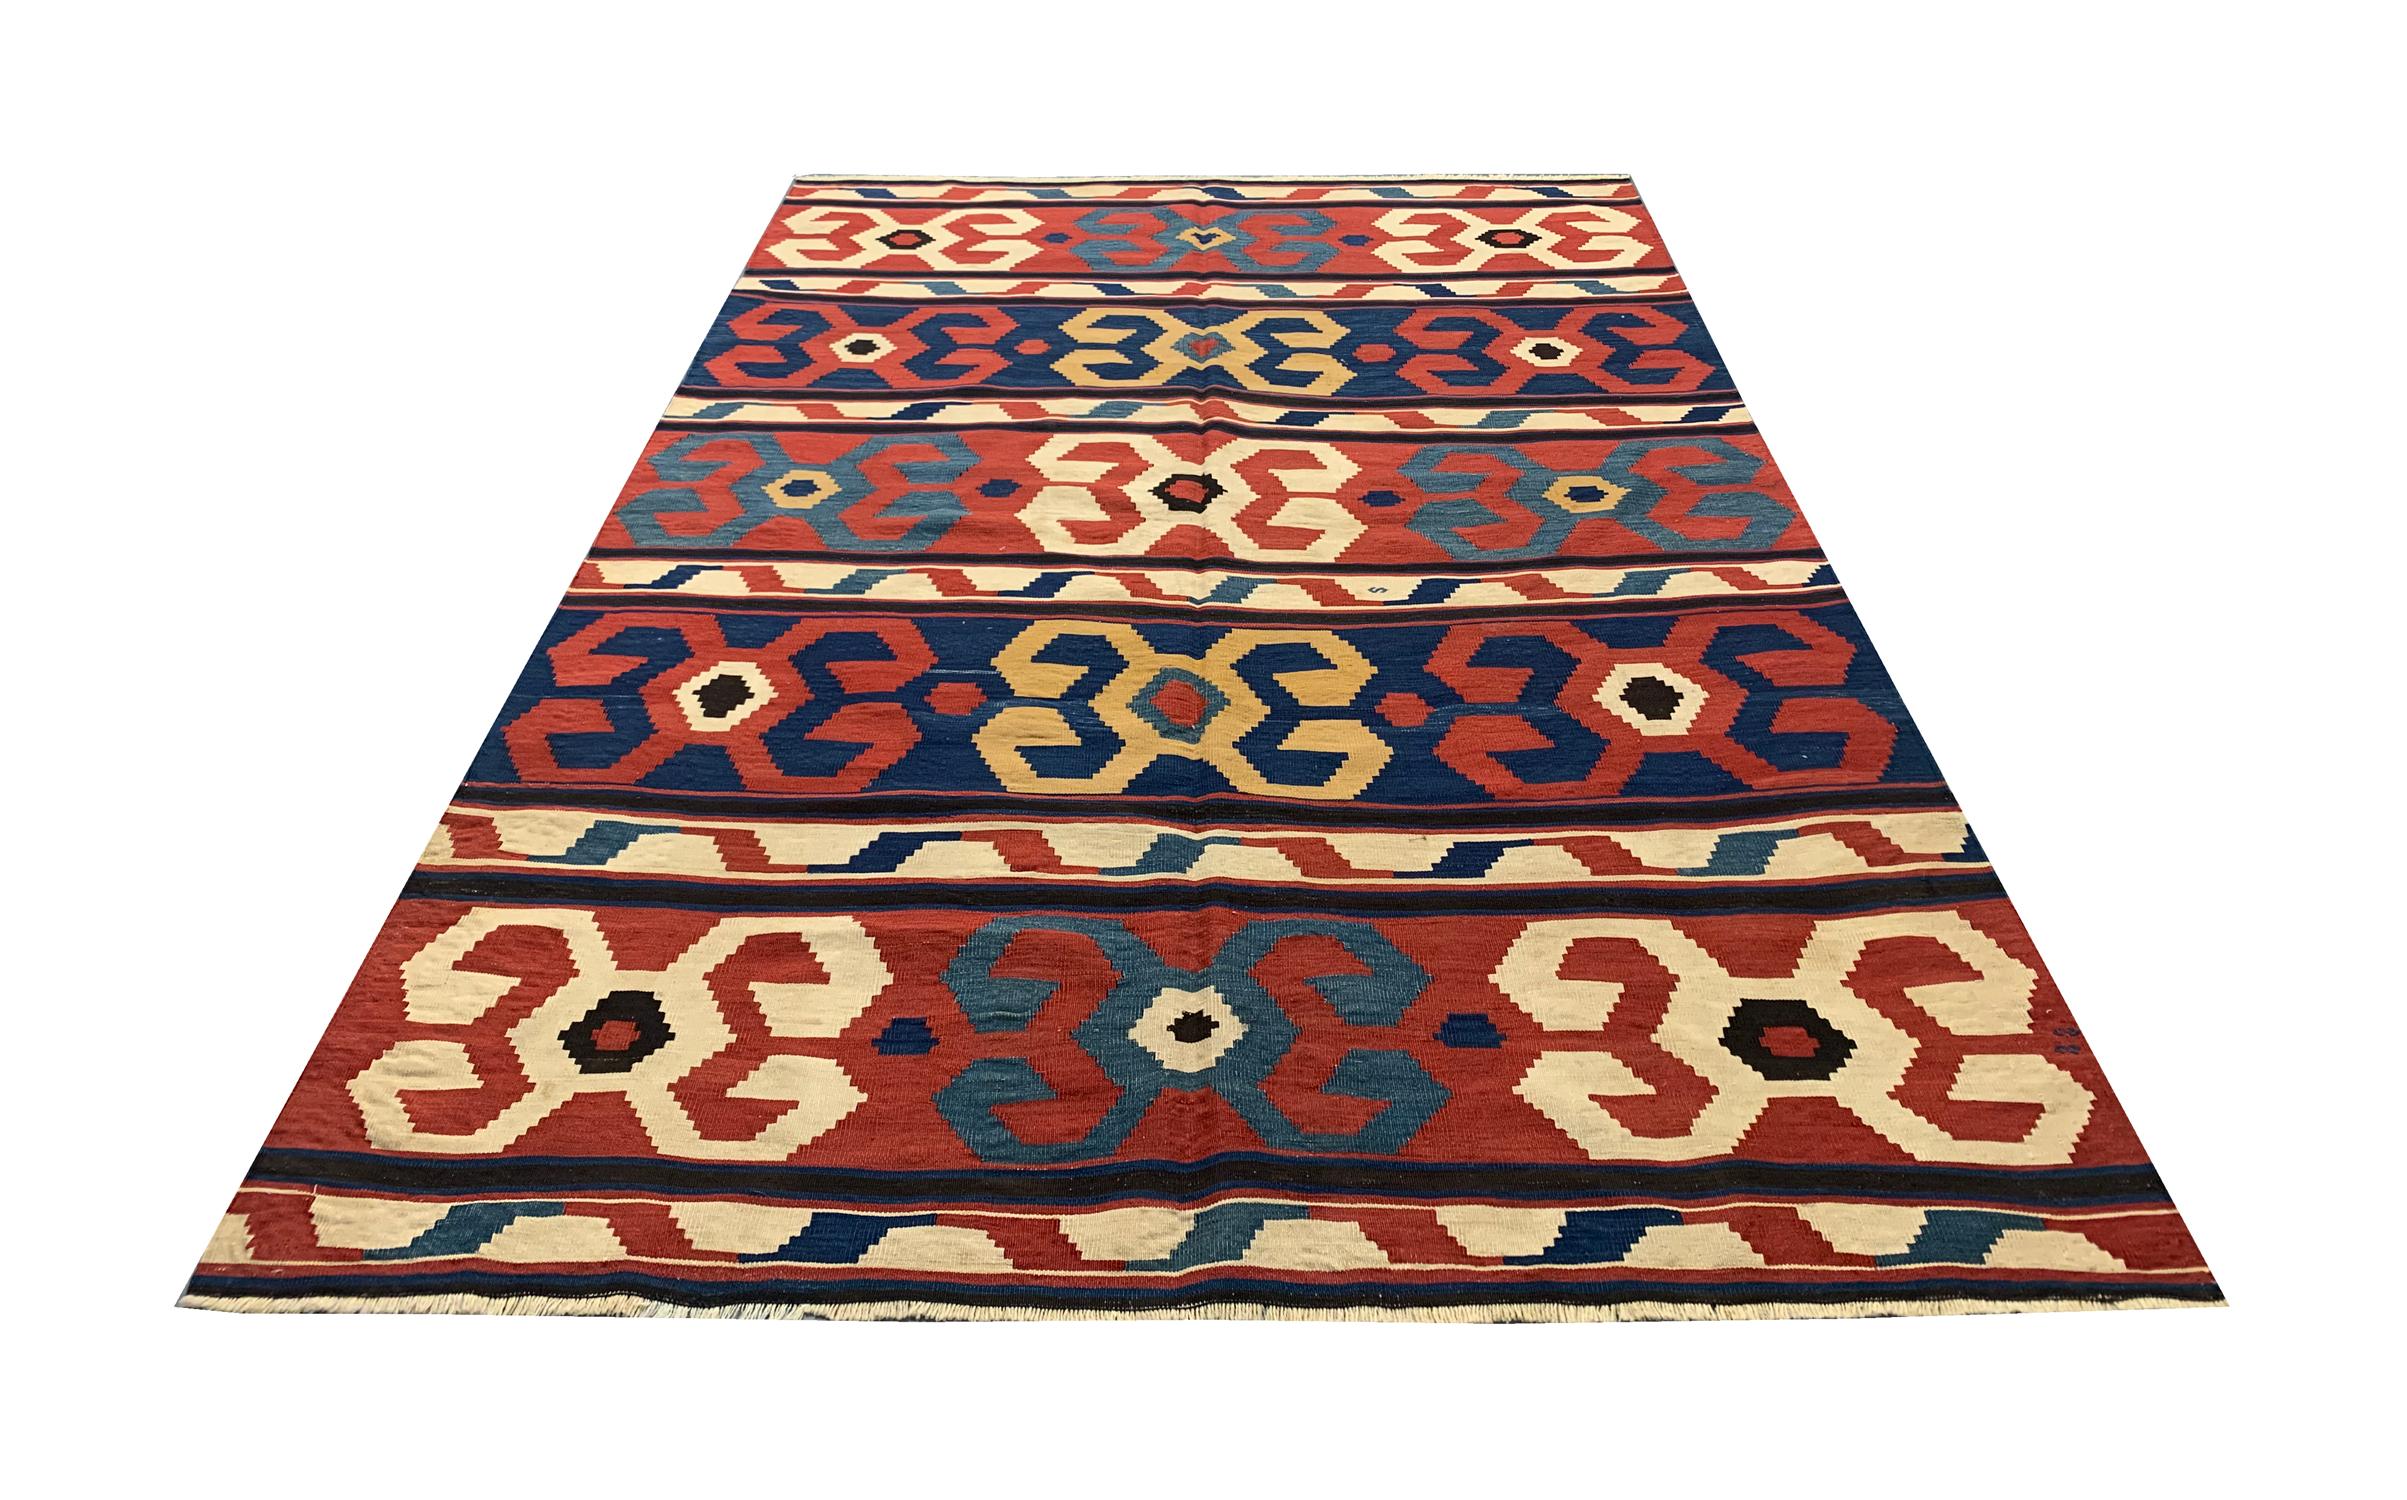 This antique Kilim has been woven to perfection on looms of master weavers of Caucasia in the 1920s. The design features a repeat motif pattern that has been woven by hand to create this all-over design. Red, cream and blue make up the main colours